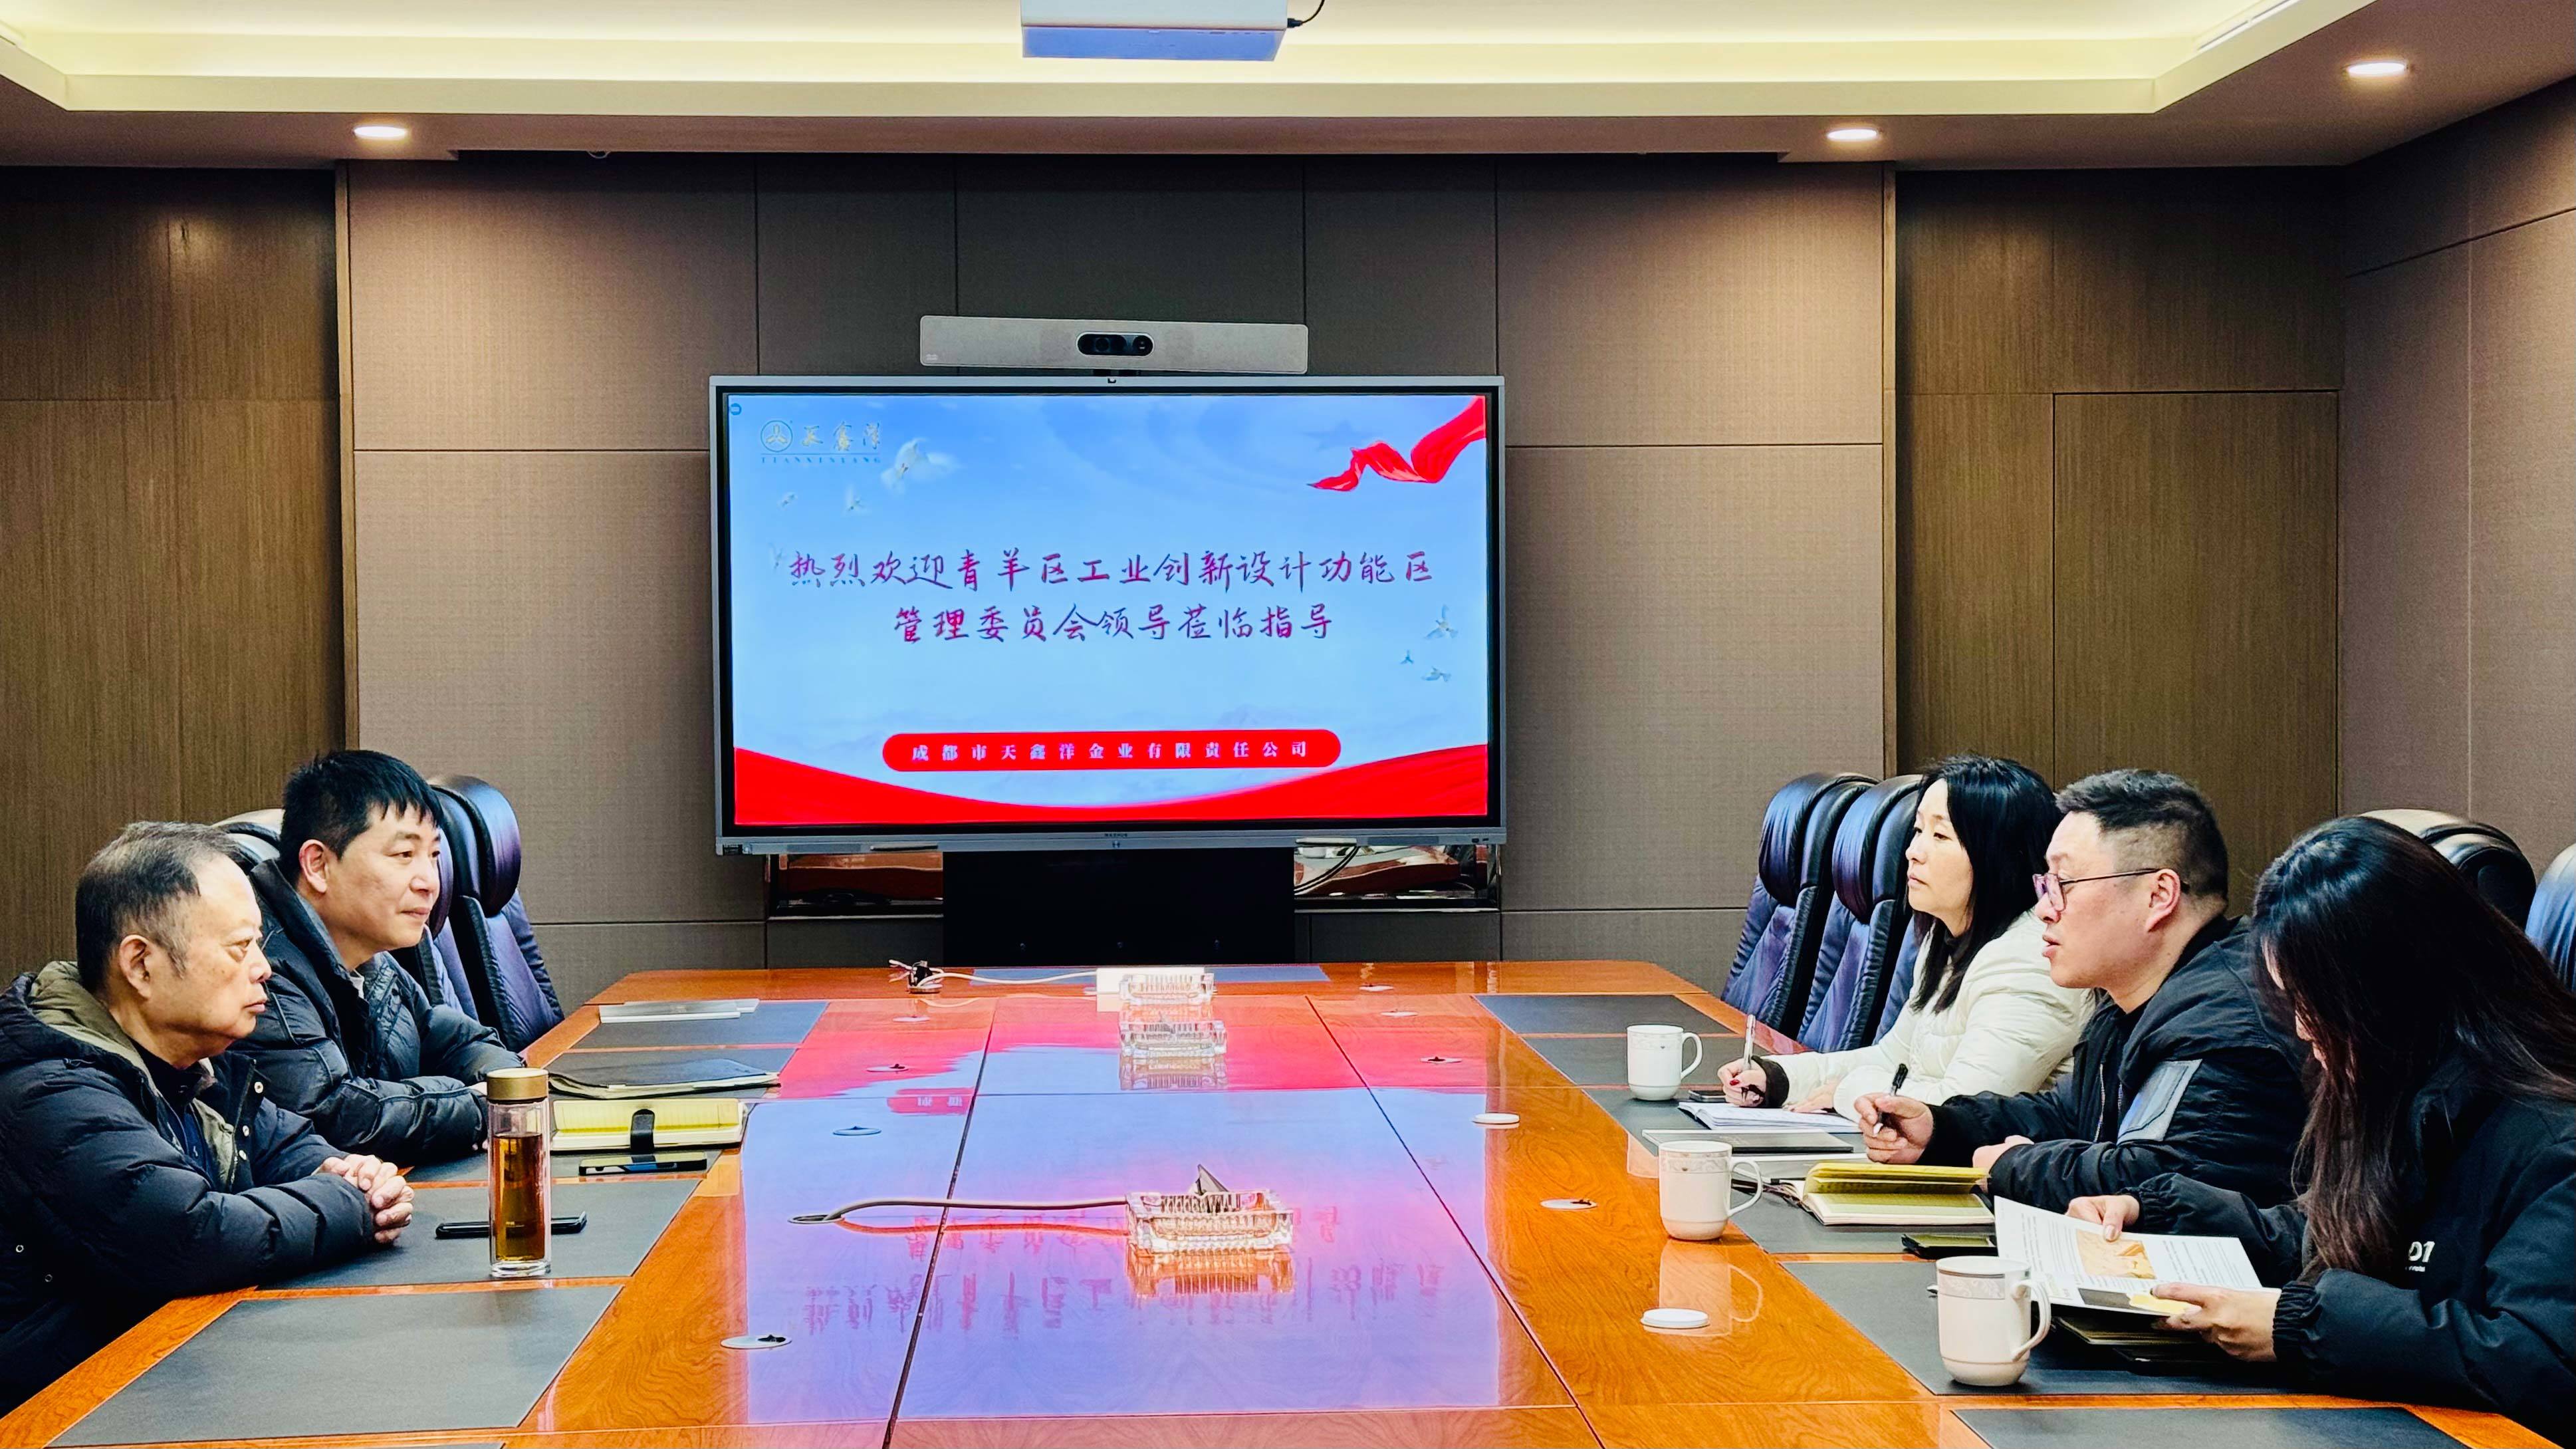 The Management Committee of Qingyang Industrial Innovation Design Functional Zone and its delegation visited and conducted research on post holiday resumption of work and production in Tianxinyang